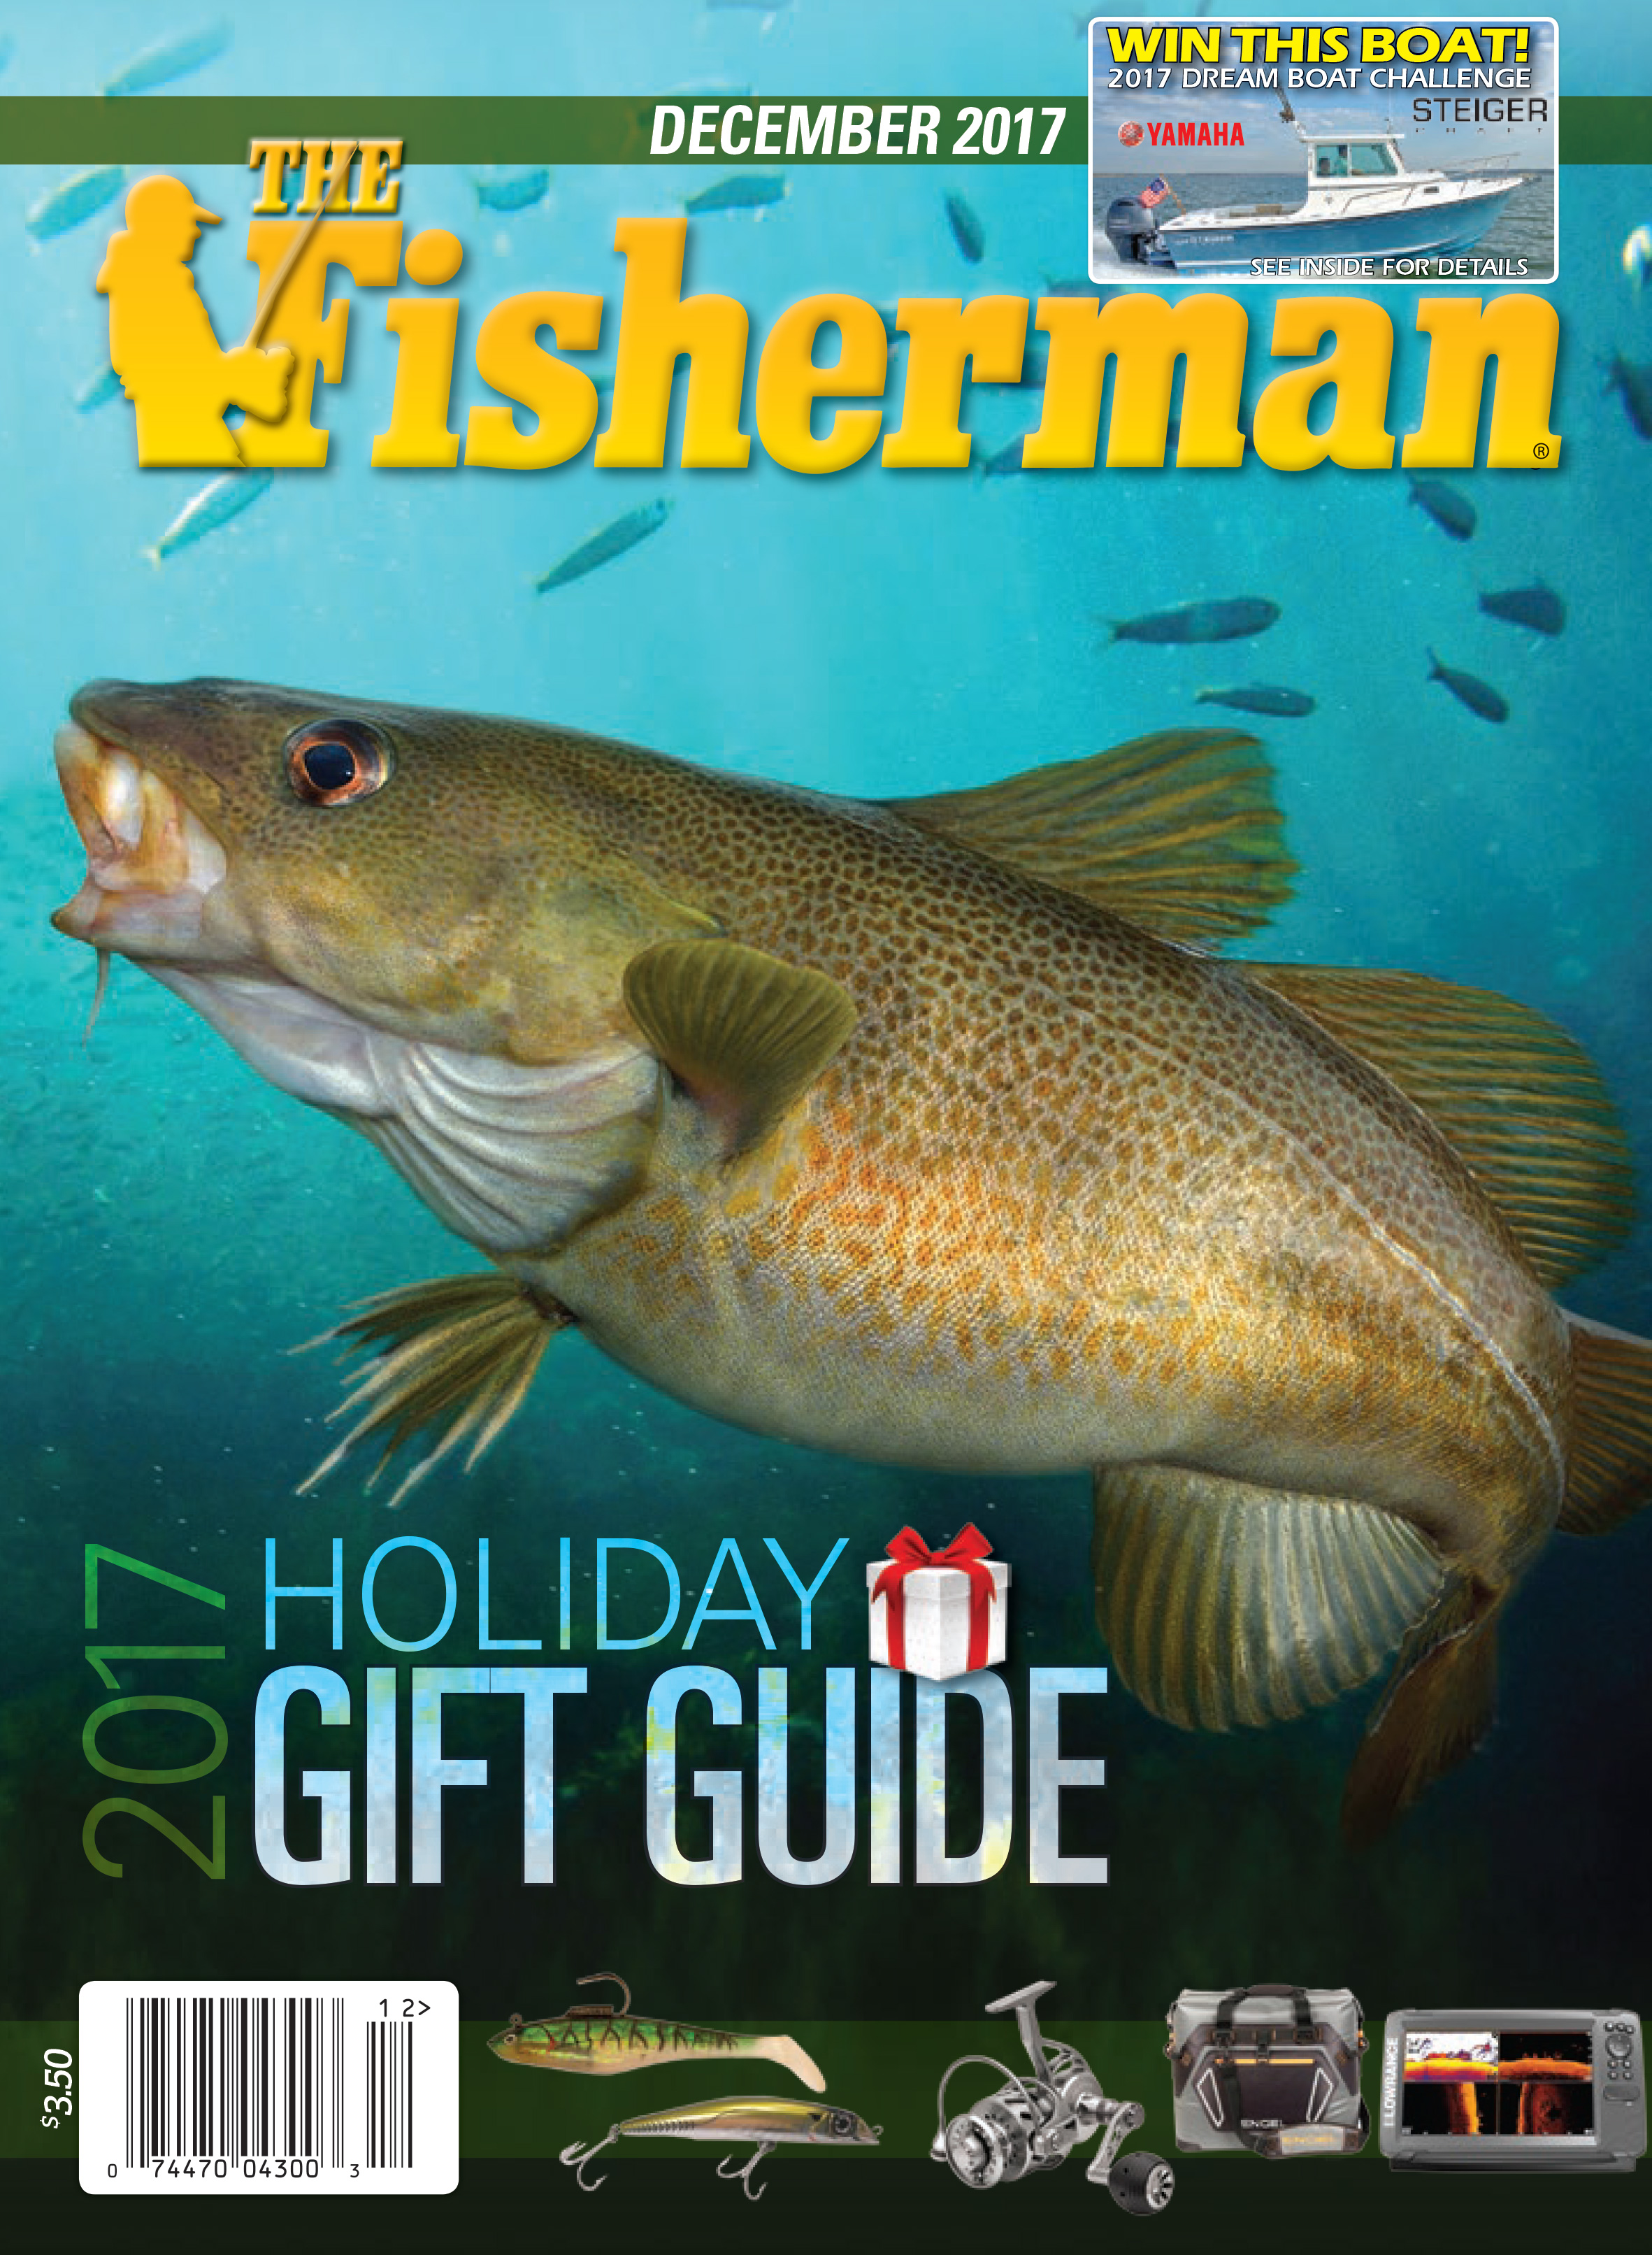 2019 Holiday Gift Guide - The Fisherman